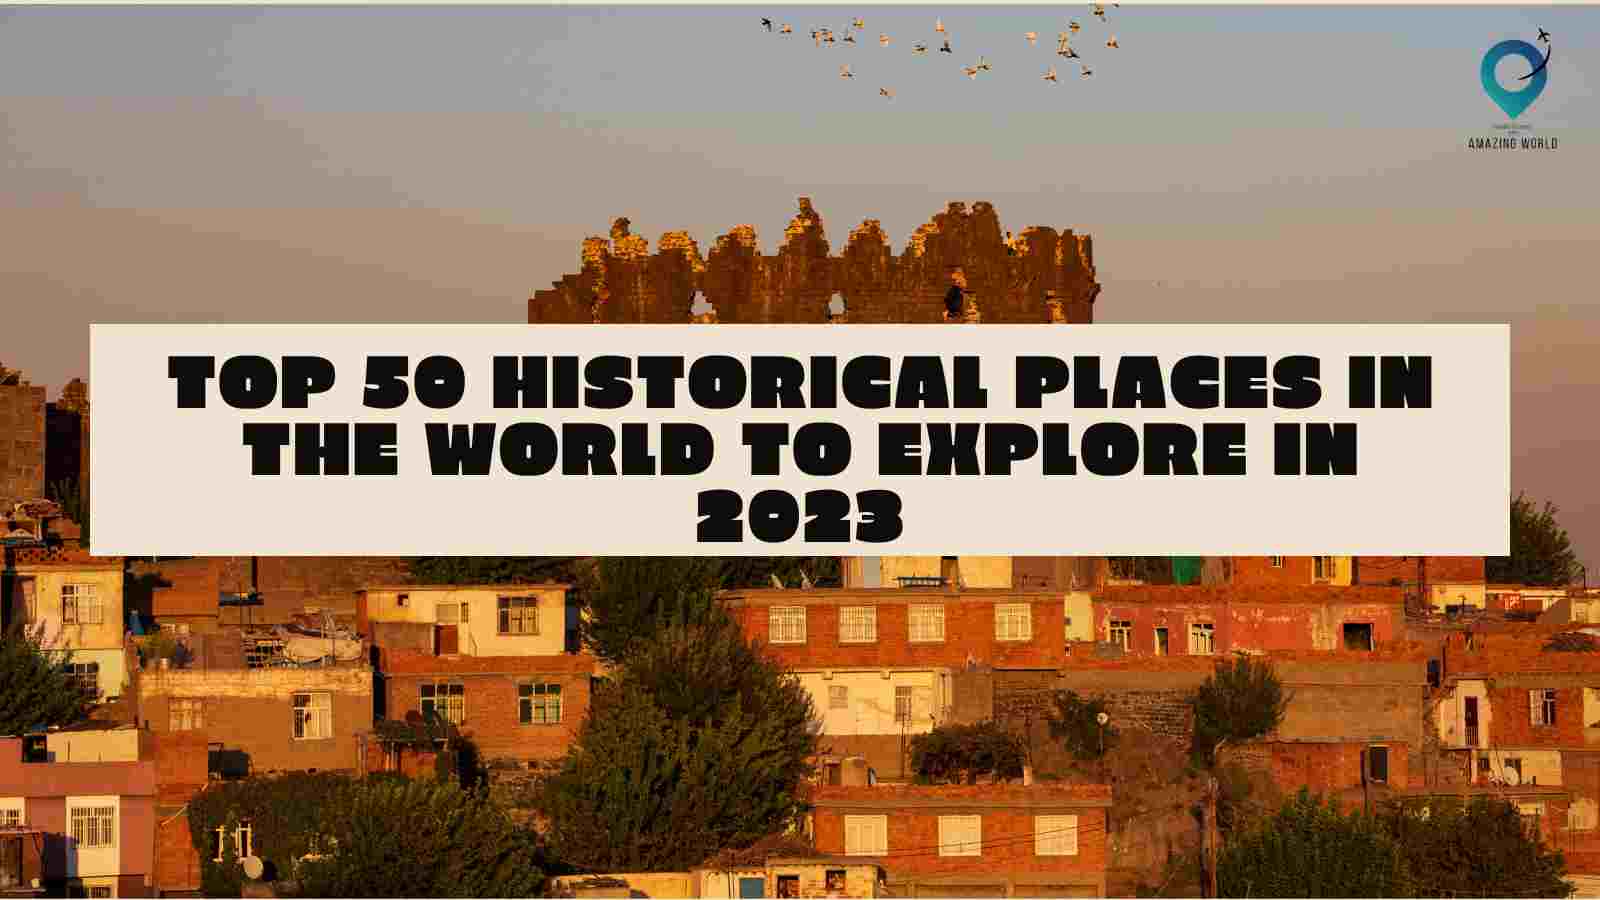 Top-50 Historical Places in the World to Explore in 2023